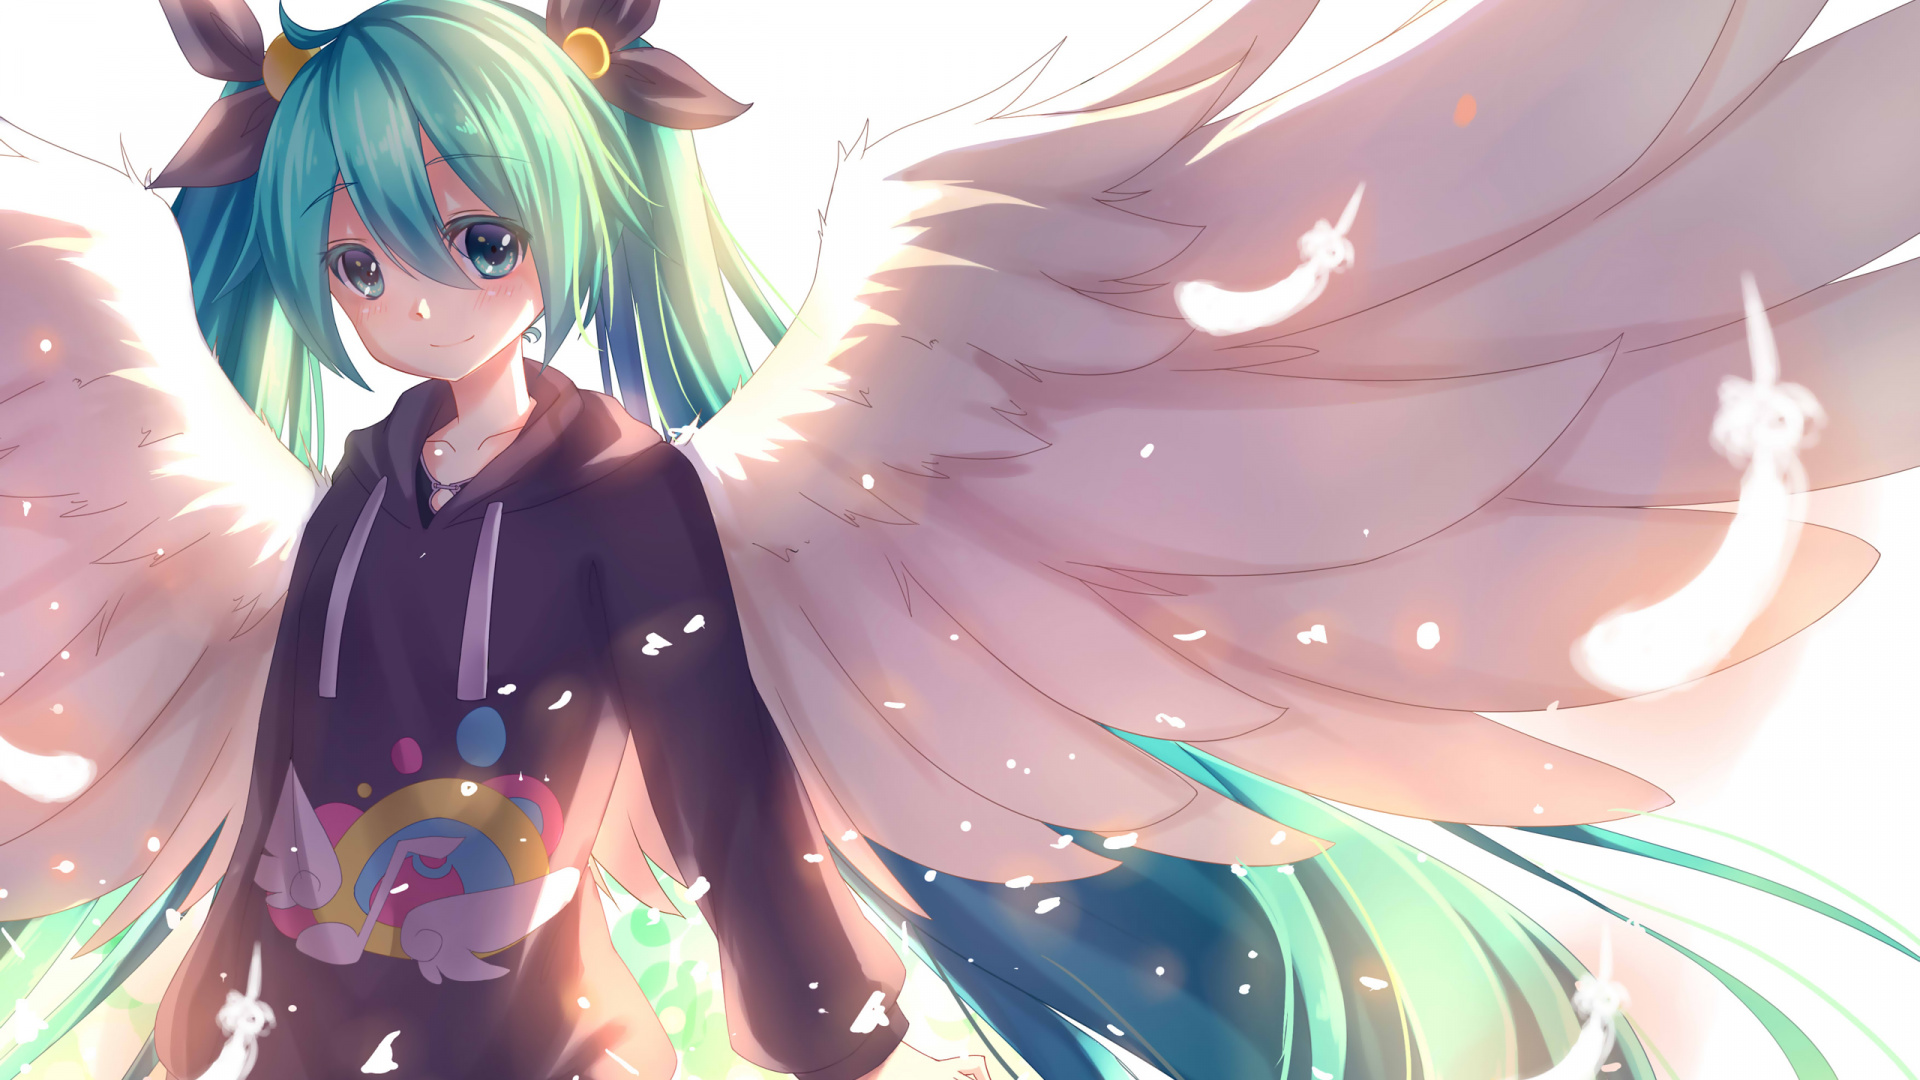 Blue Haired Girl Anime Character. Wallpaper in 1920x1080 Resolution